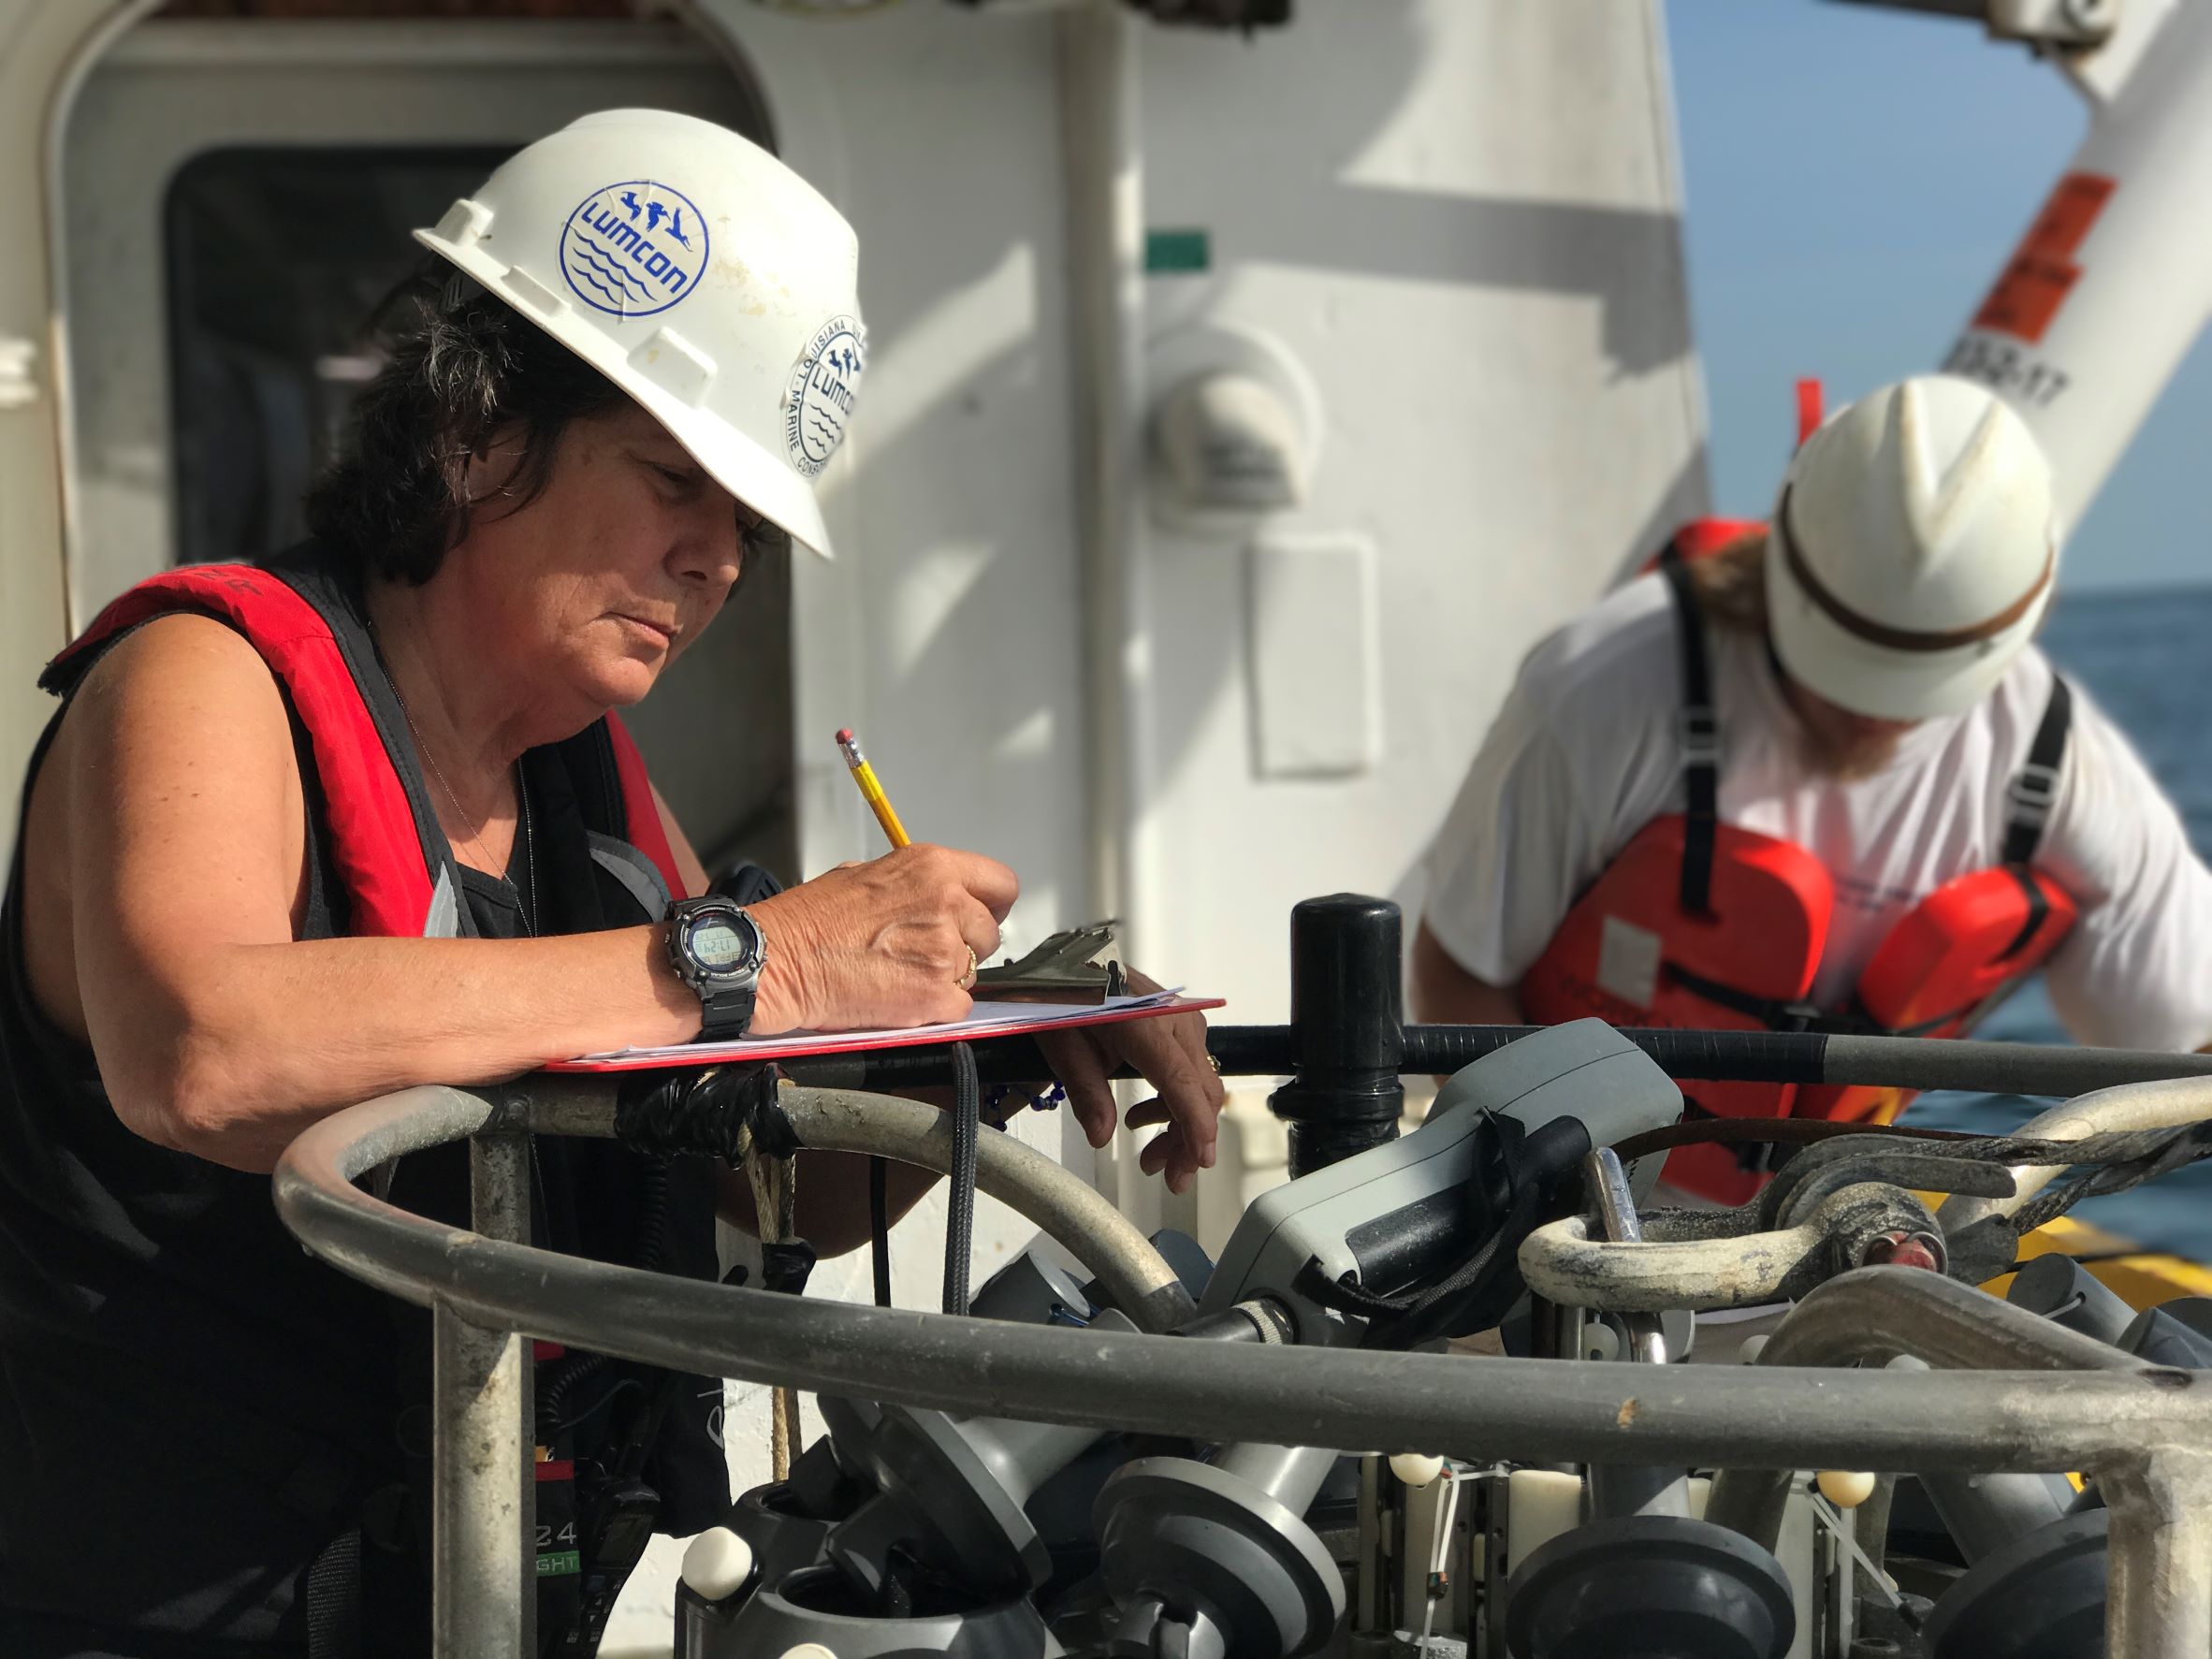 LSU's Nancy Rabalais gathers data while aboard the annual research cruise to measure hypoxia in the Gulf of Mexico